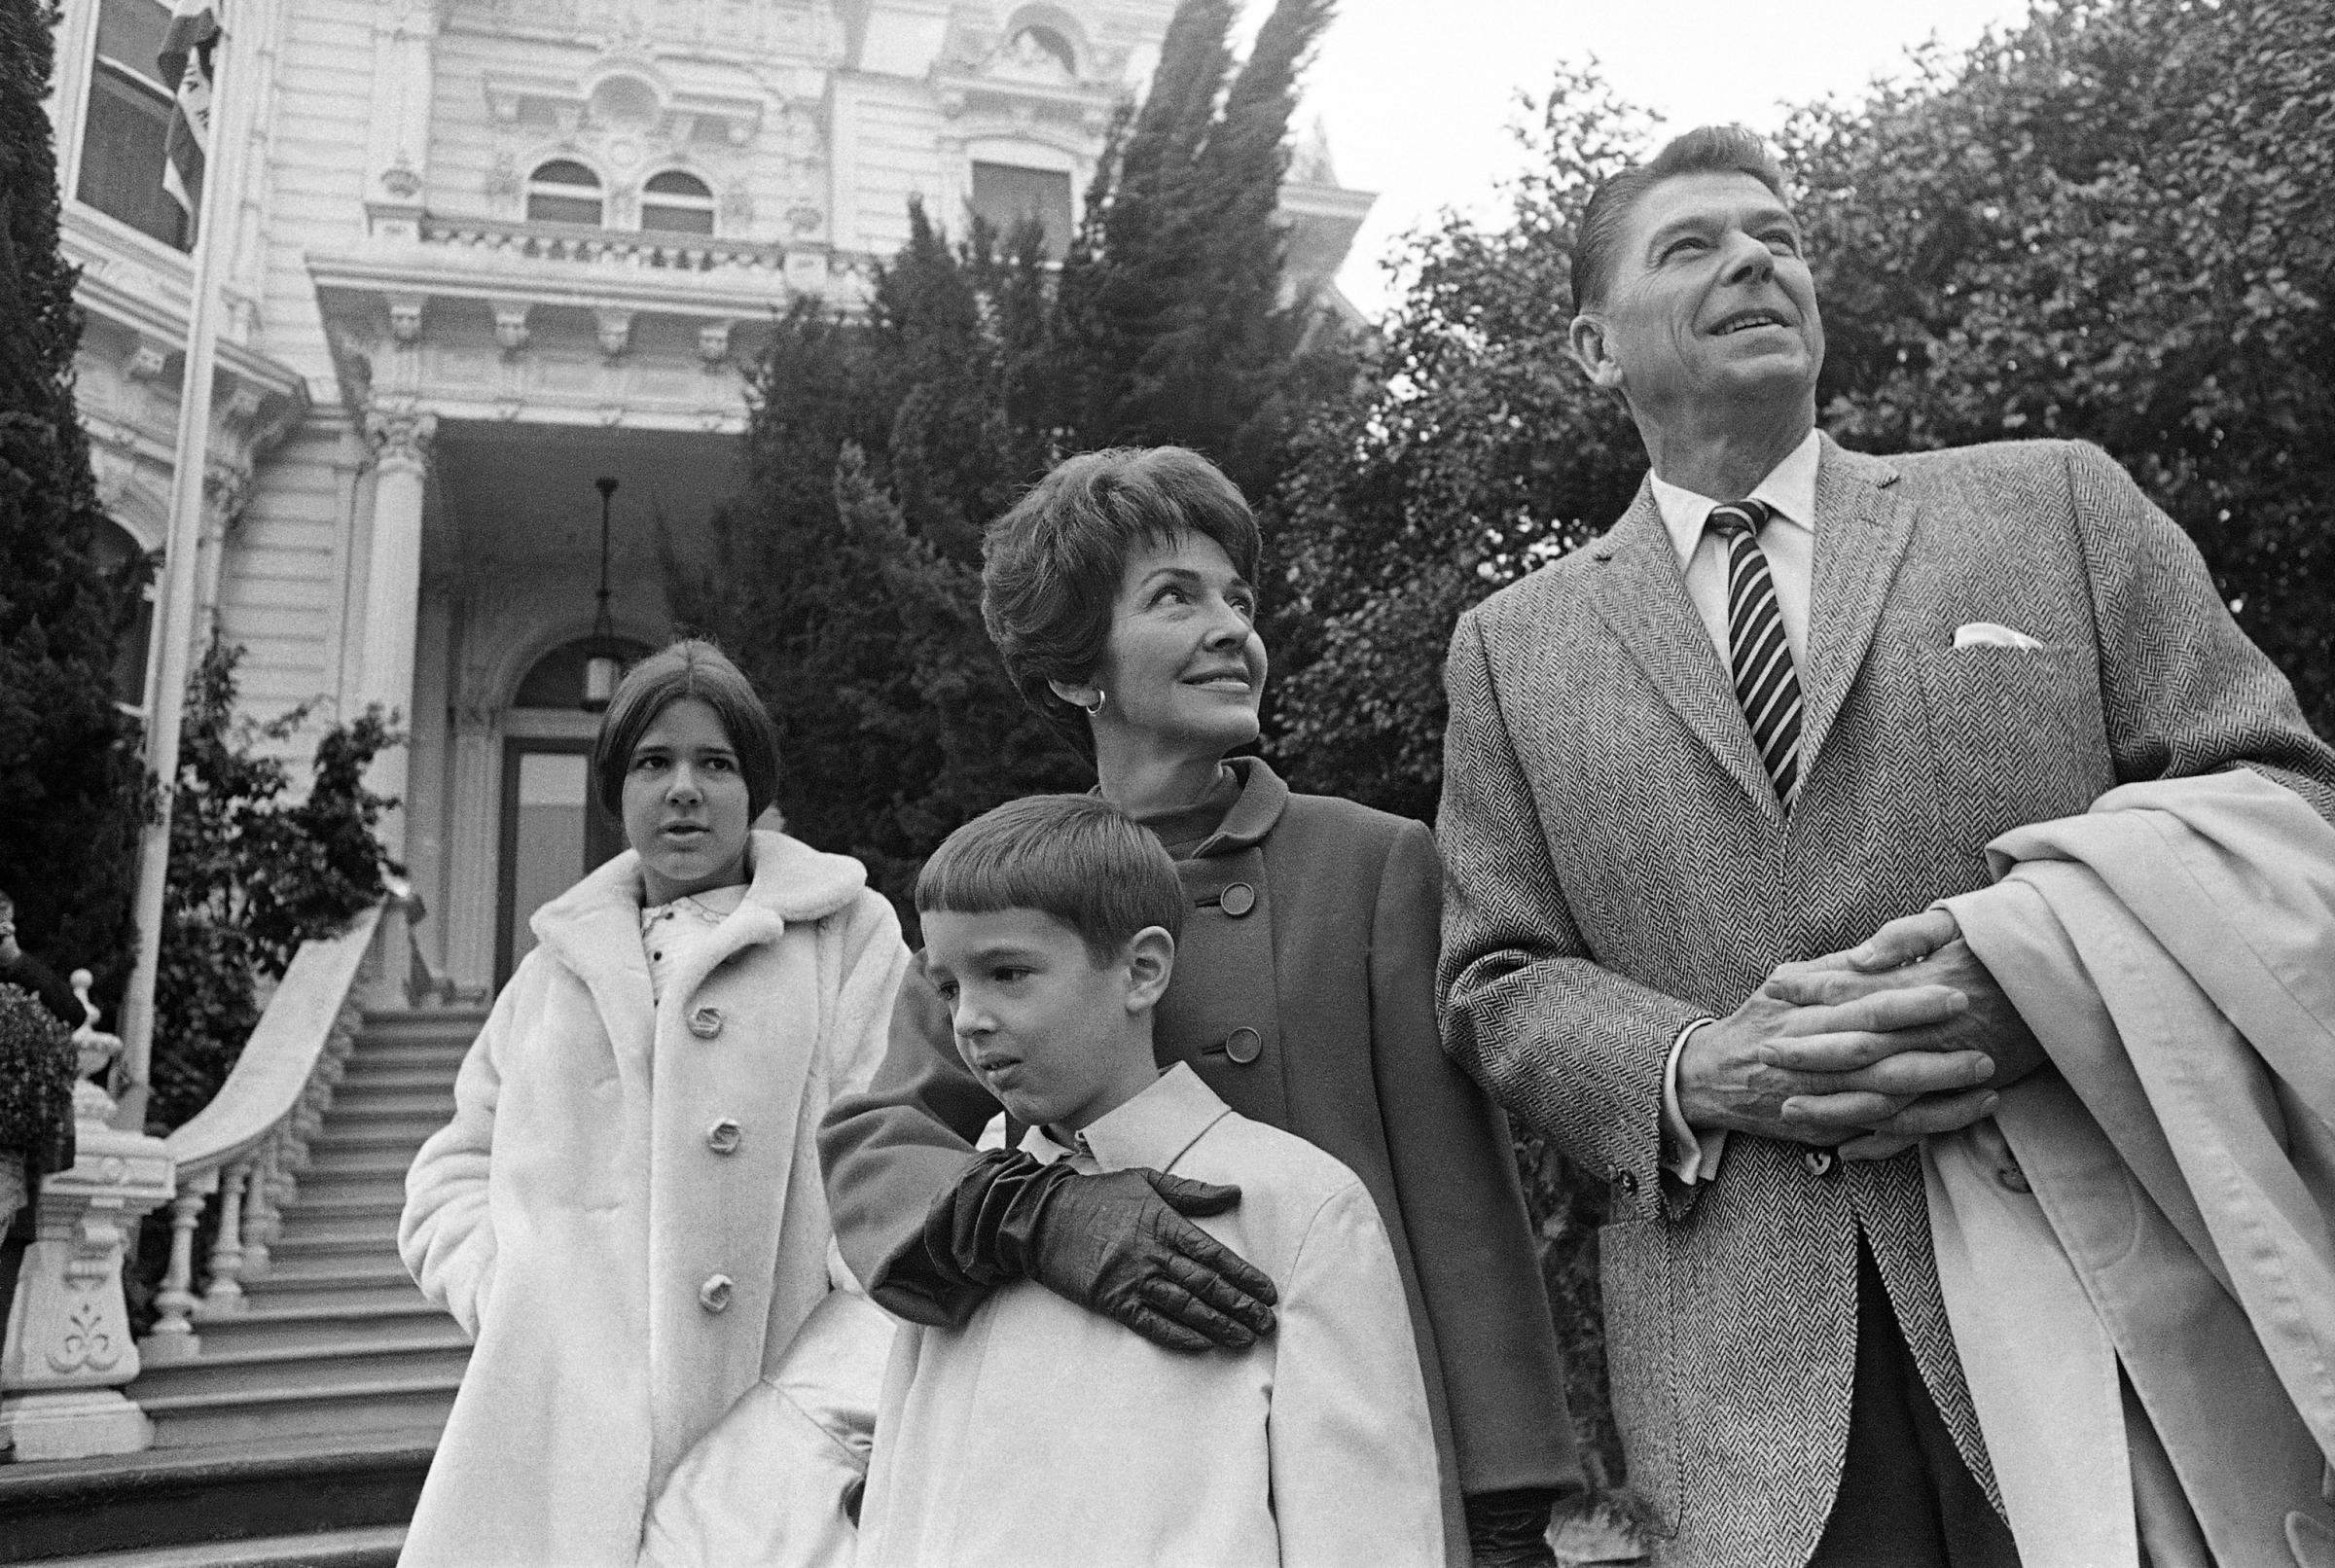 Then governor-elect of California Ronald Reagan is photographer with his wife, Nancy, and children Ronald Jr., 8, and Patricia, 13, outside the Executive Mansion in Sacramento, Calif., on Jan. 1, 1967.